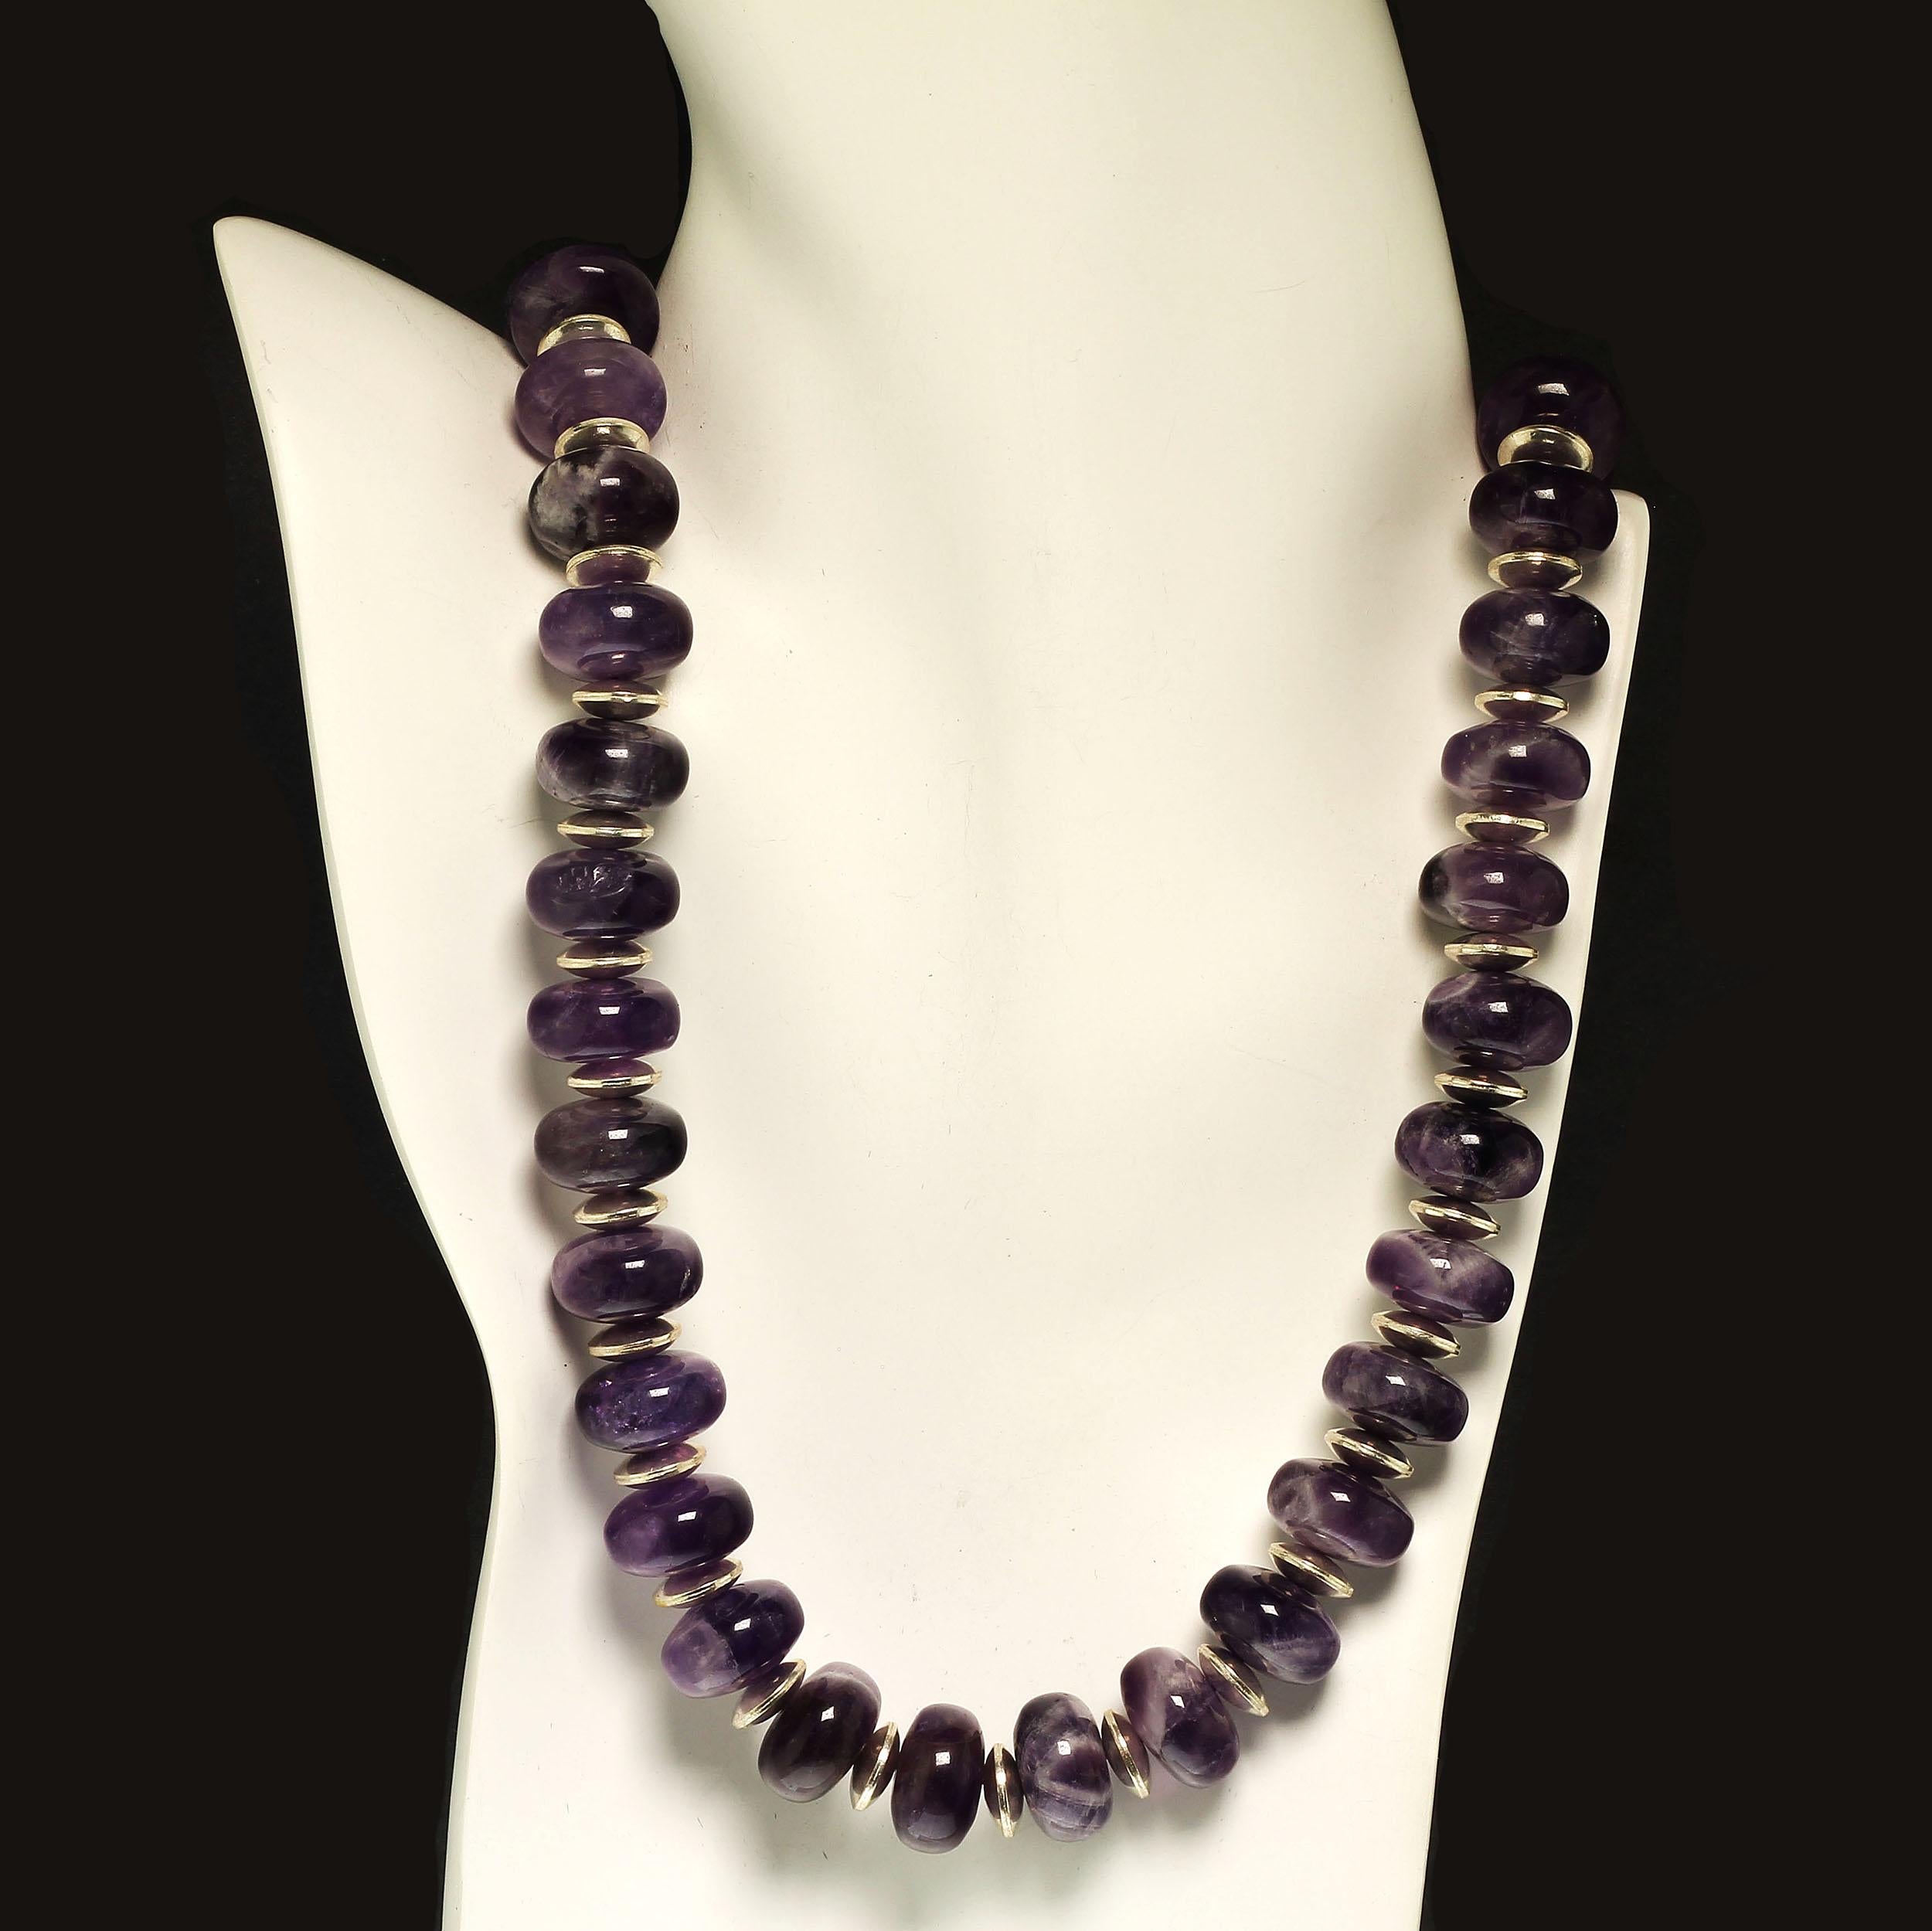 Bead AJD Translucent Rondelles of Amethyst Necklace February Birthstone